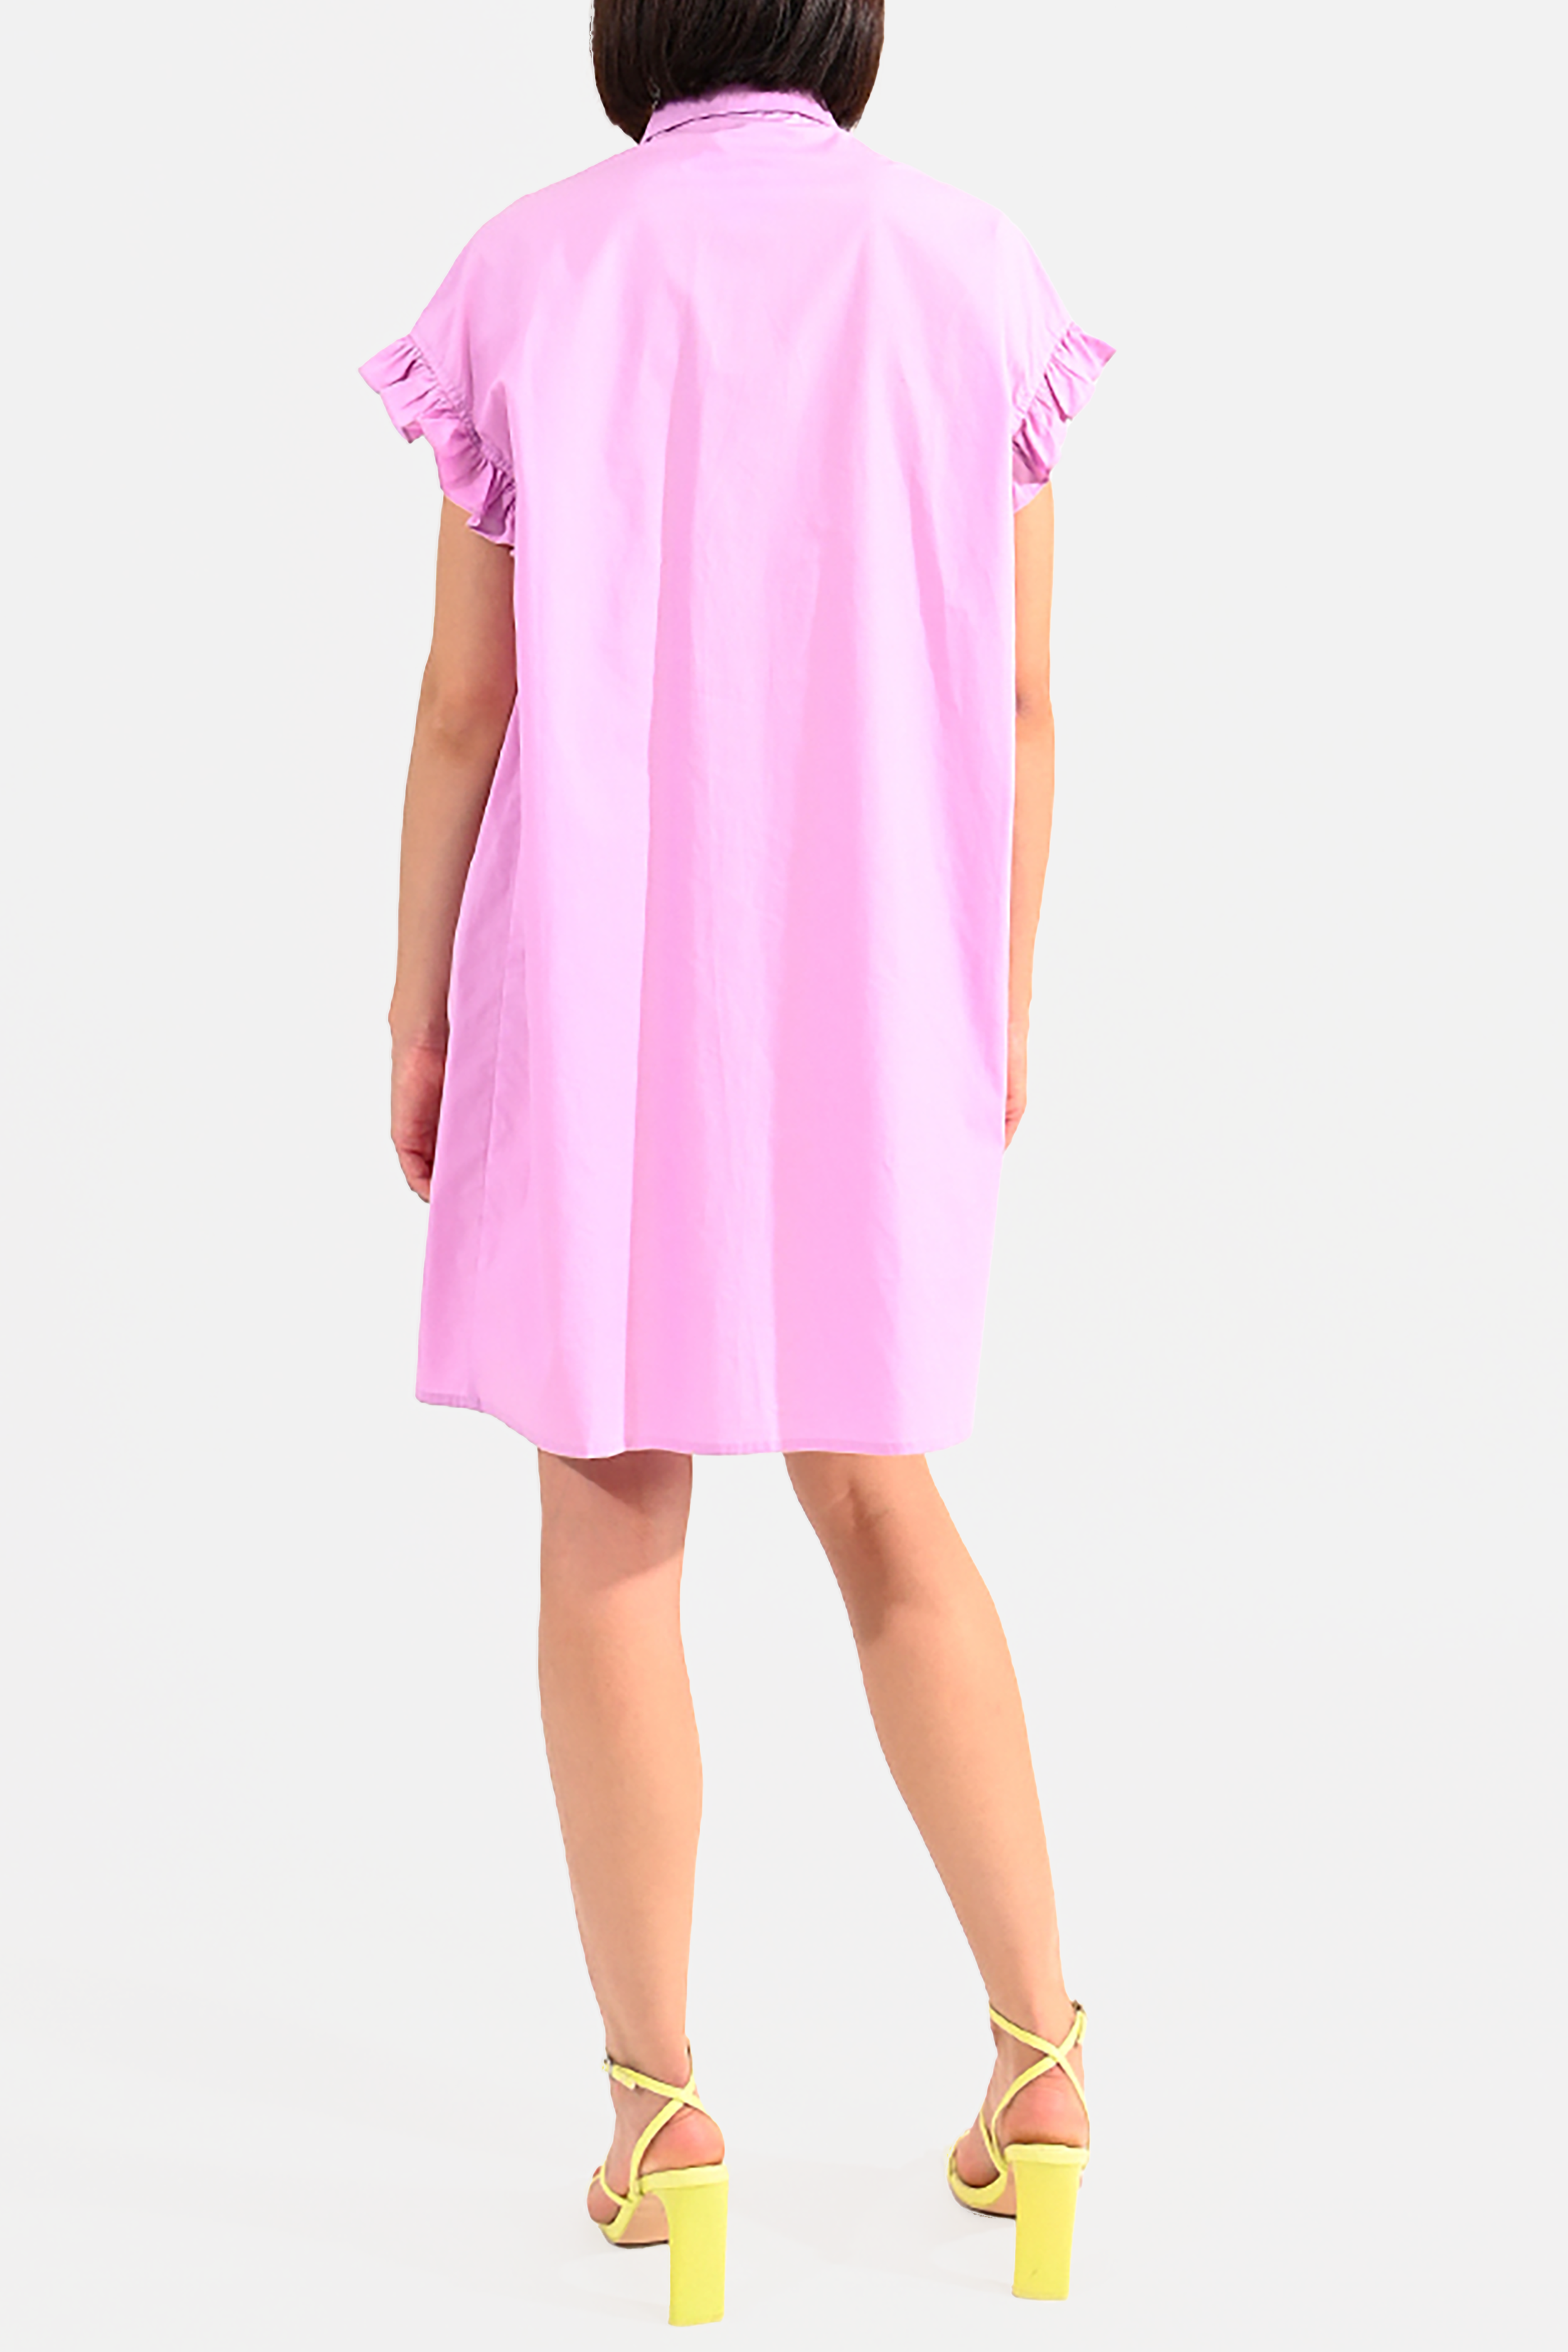 Minette Shirt Dress in Lilac